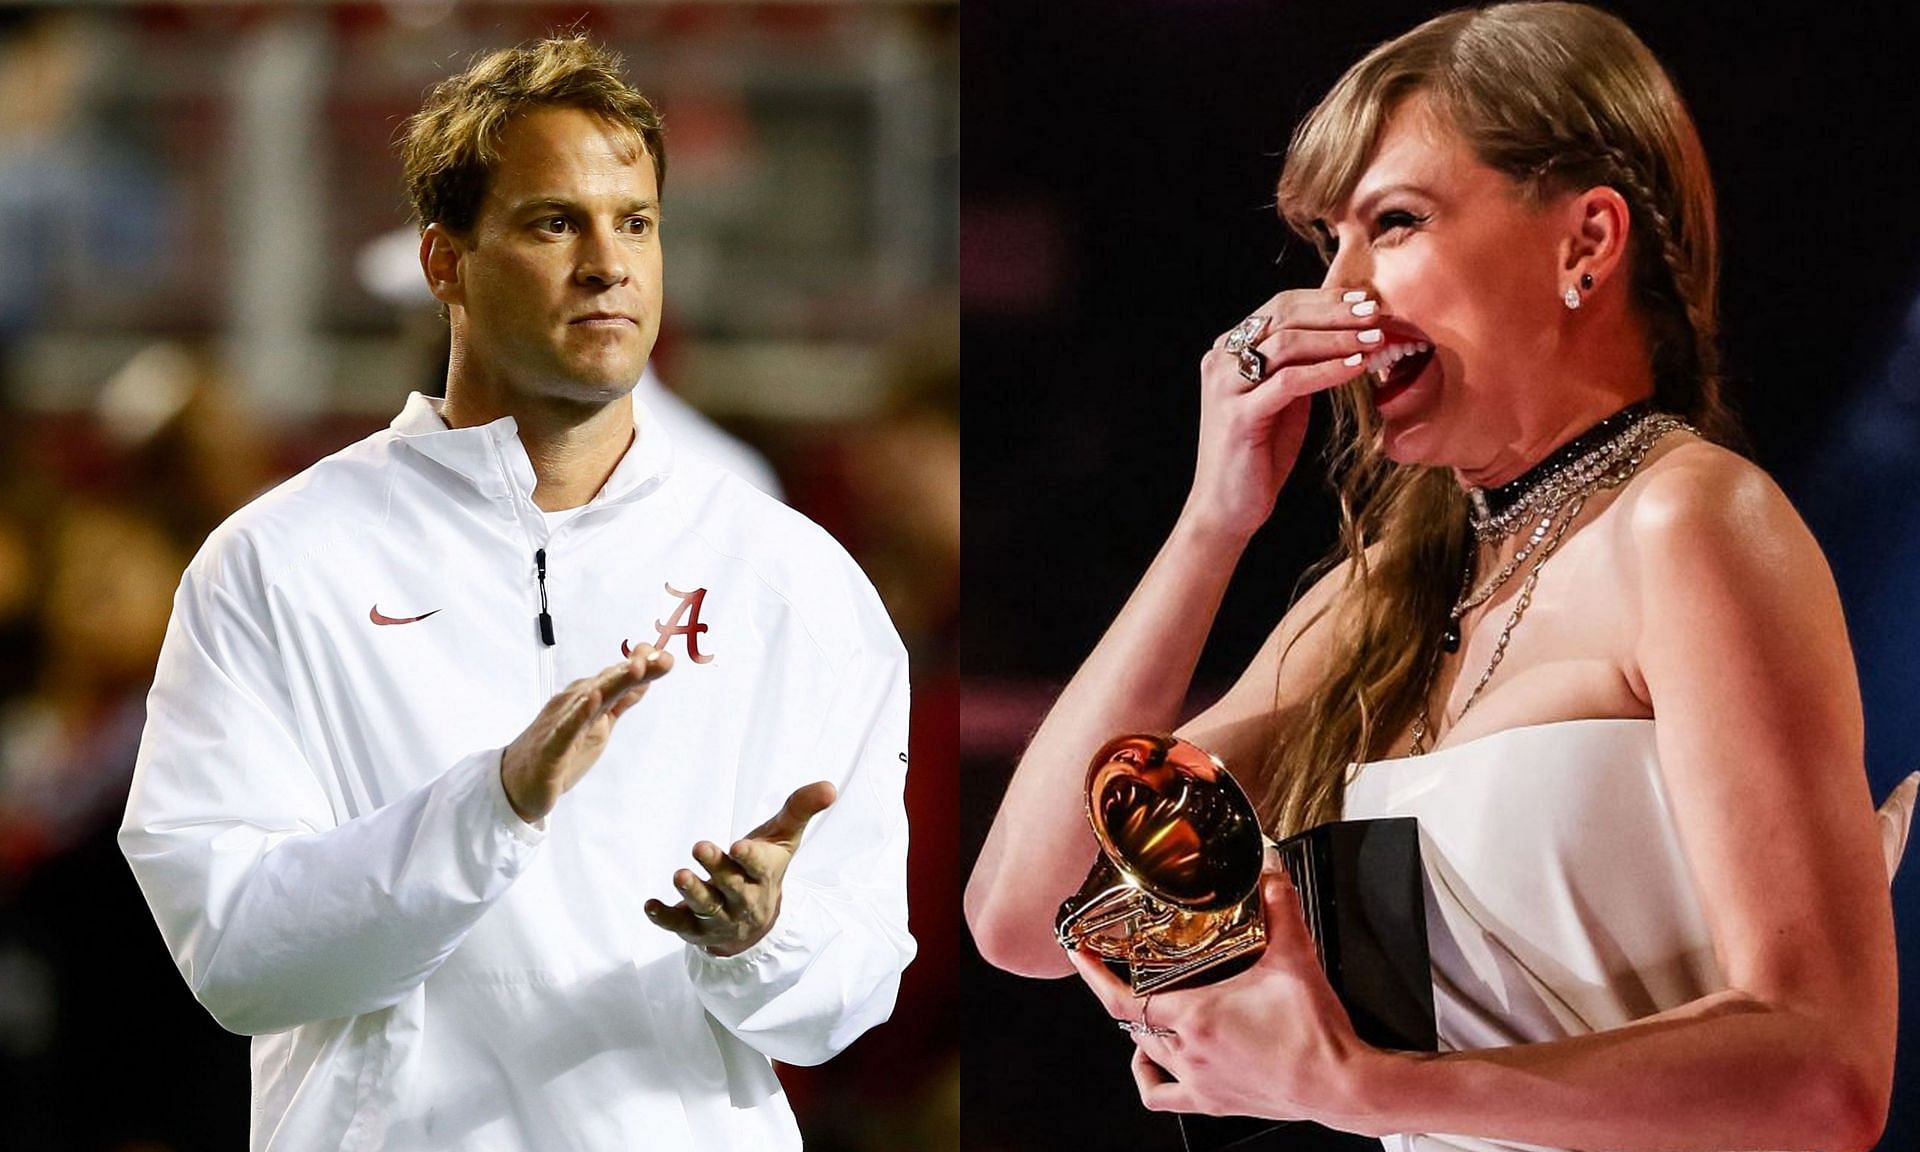 Lane Kiffin channels his inner Swiftie in response to Taylor Swift